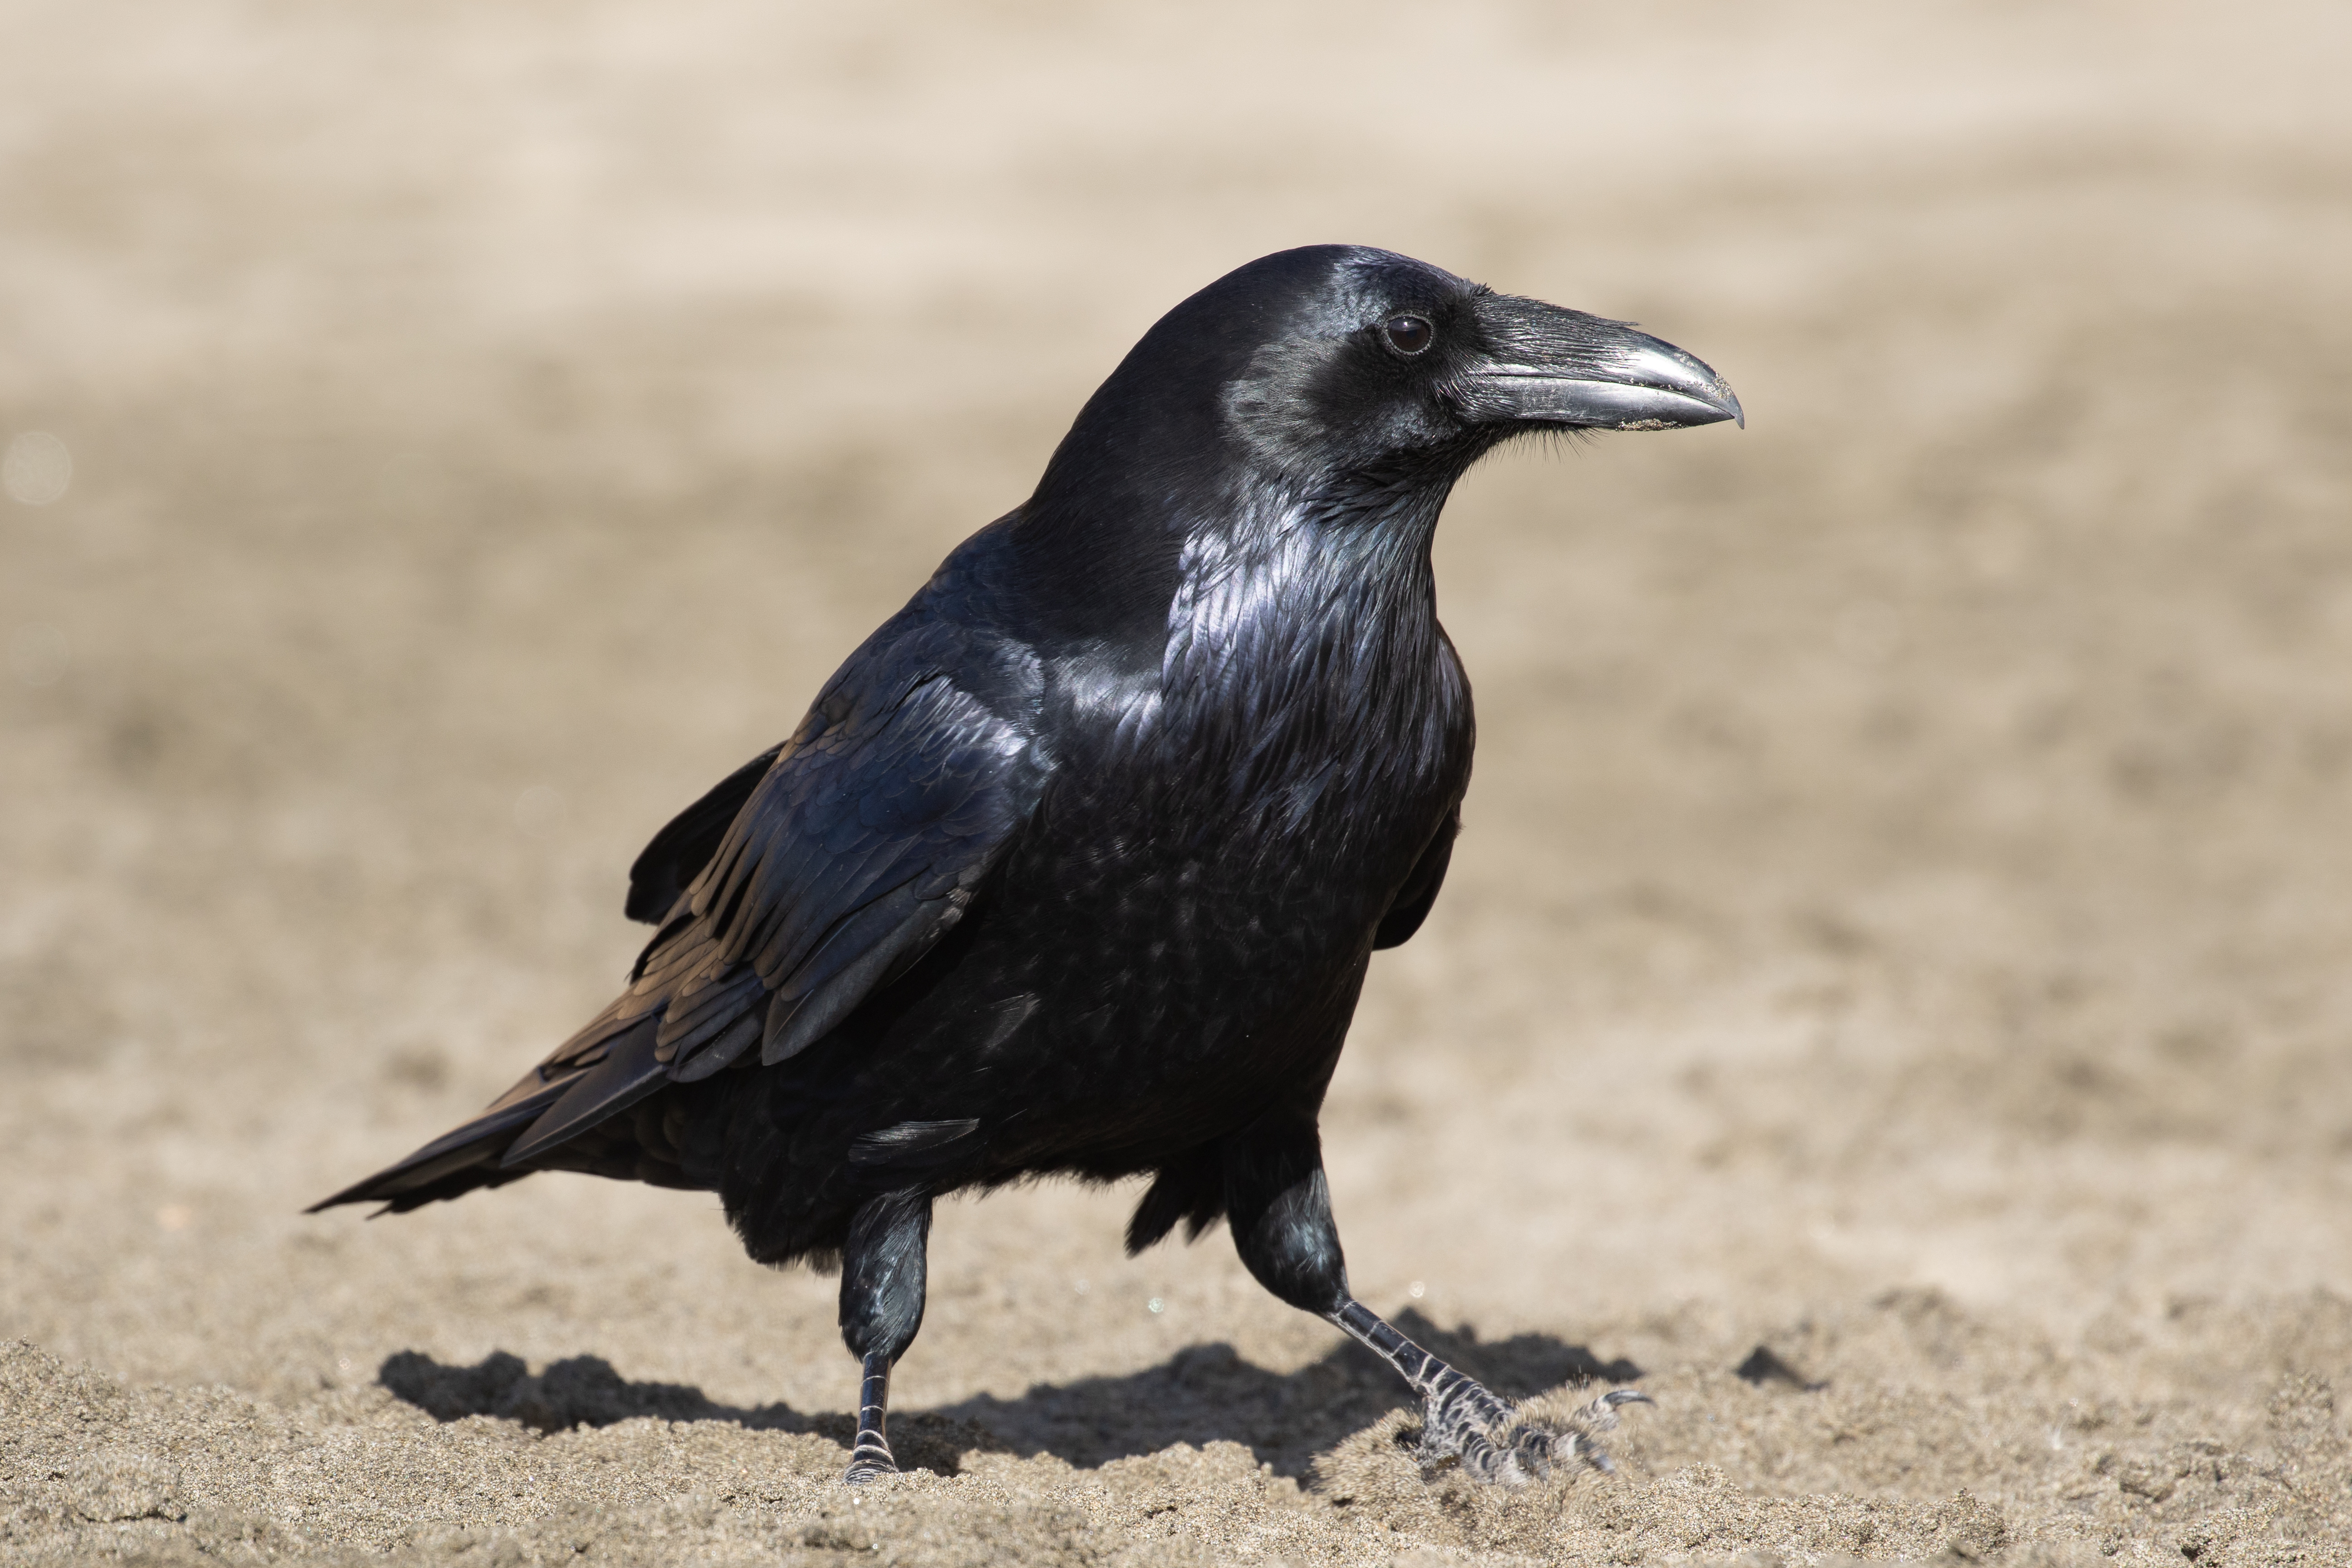 Common Ravens, which have become a fairly common species in New York City in just the last decade, are often seen around the Unisphere. Photo: Ryan F. Mandelbaum